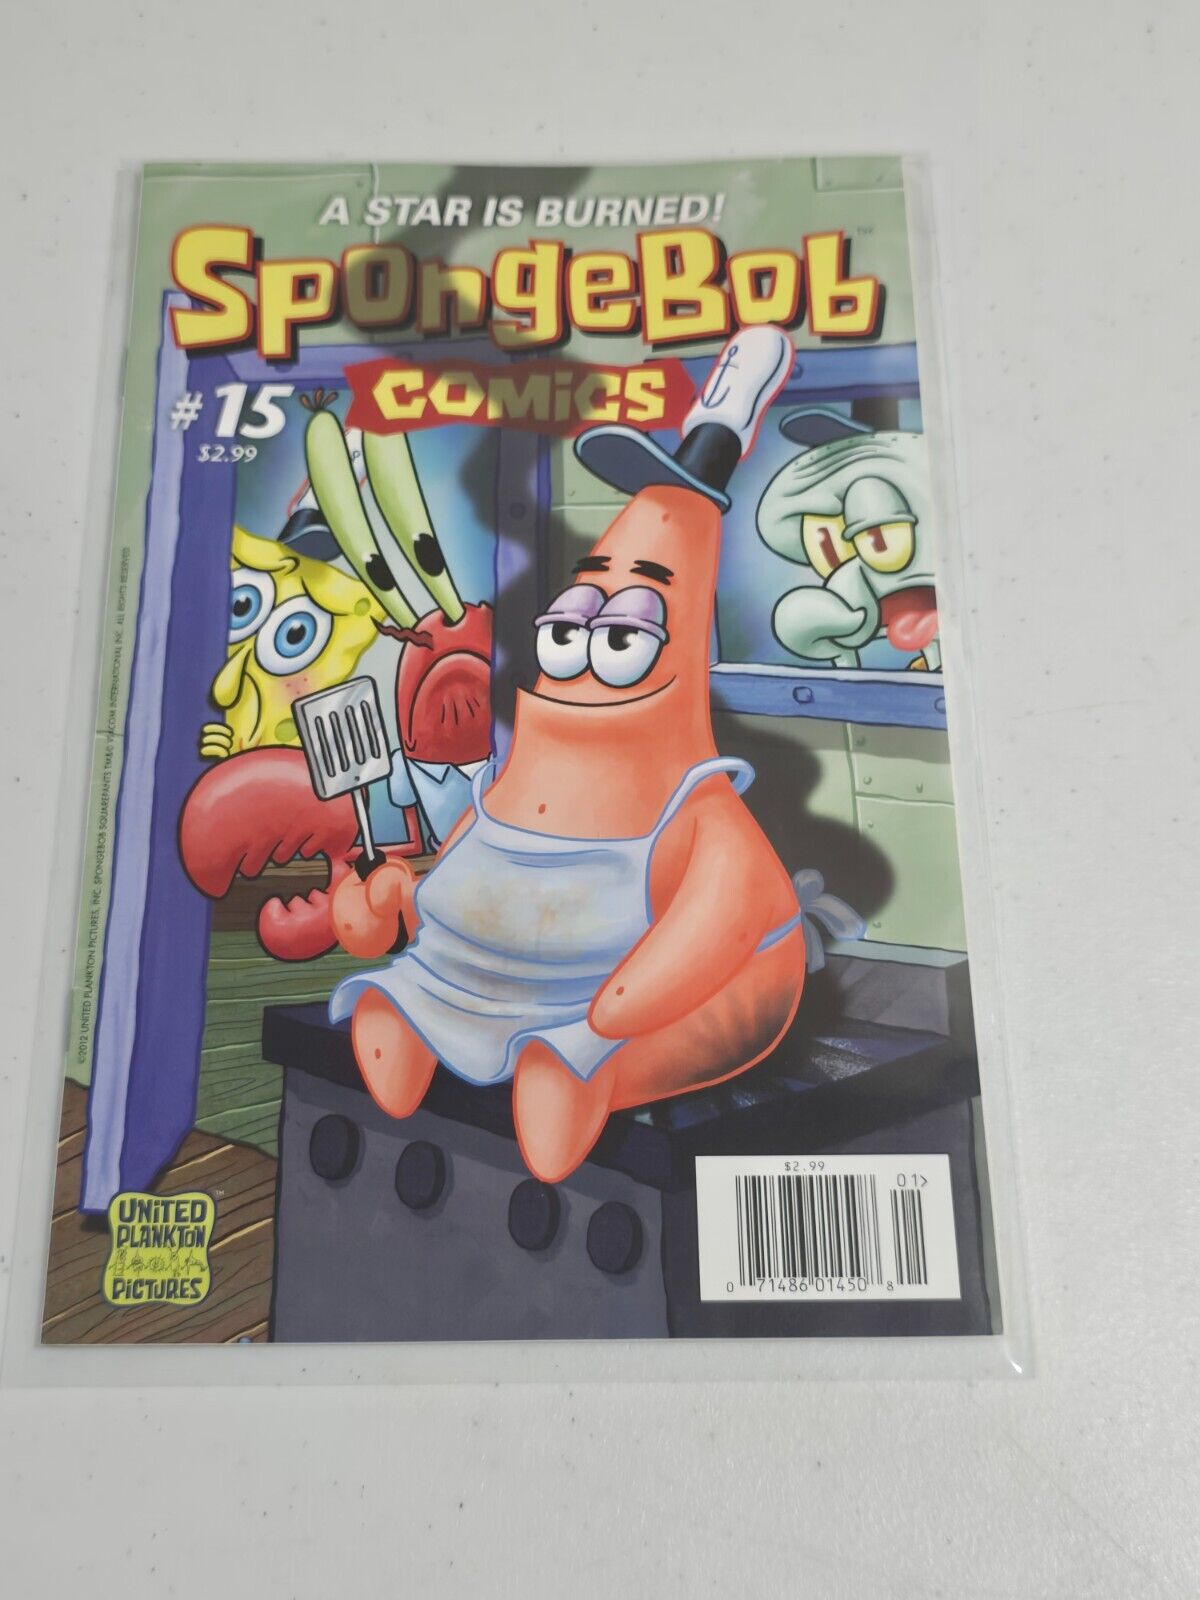 Spongebob Comic #15  United Plankton Pictures RARE  NM, like it was never opened